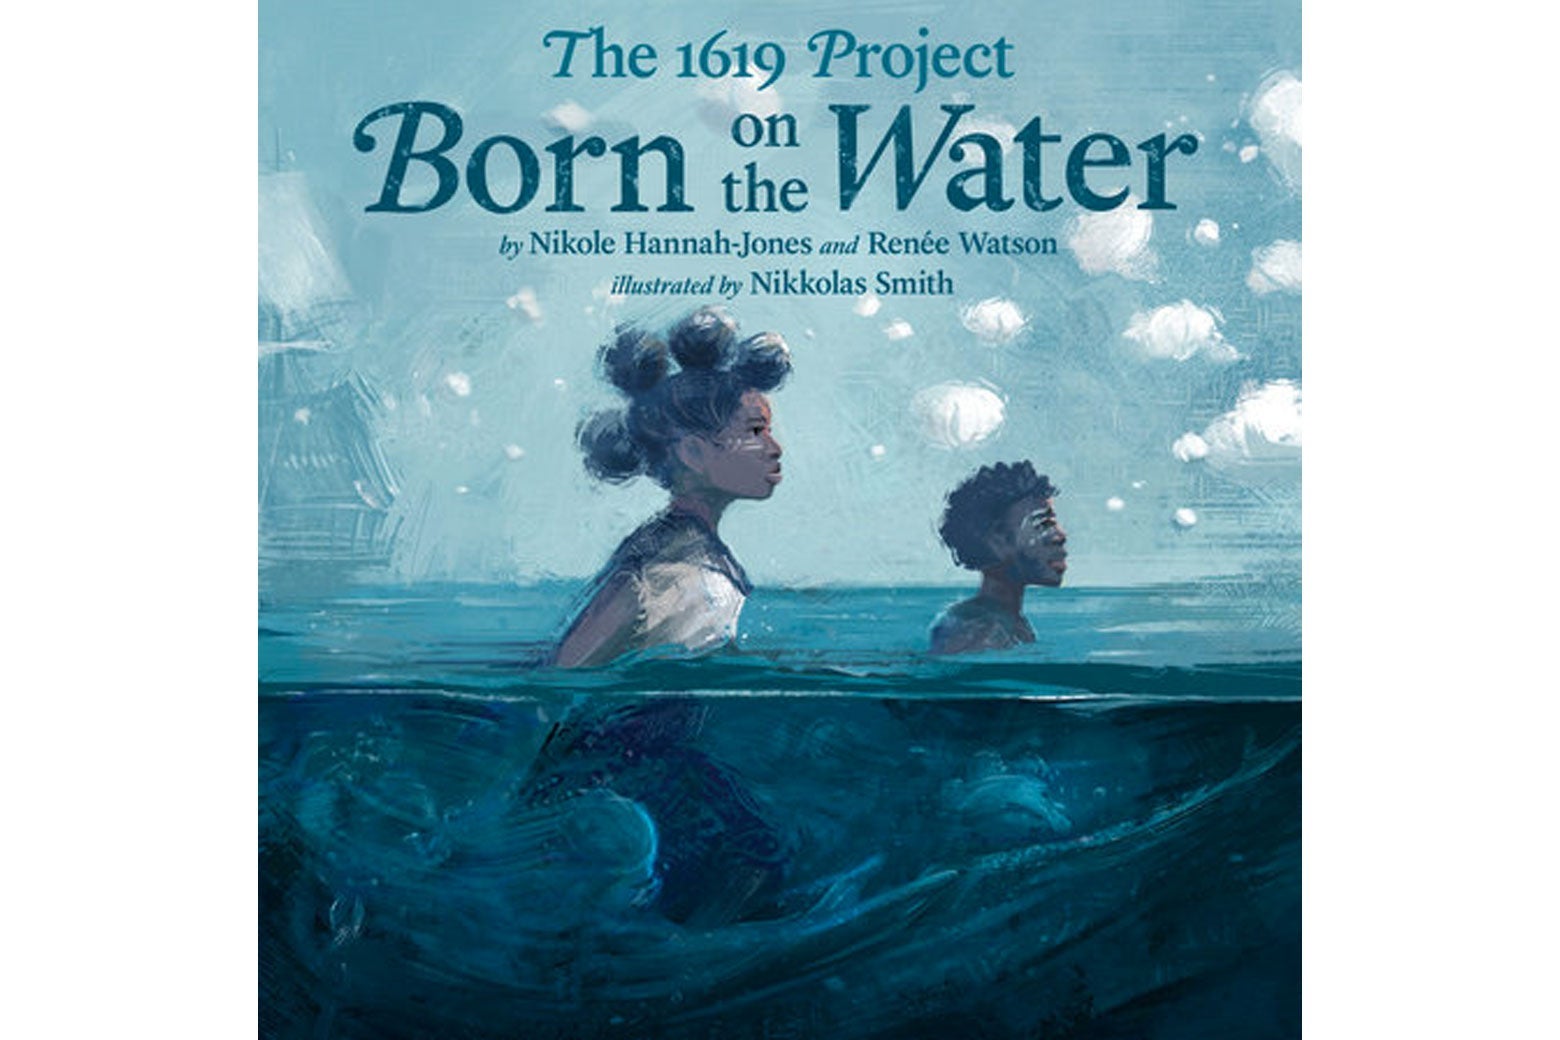 The cover of Born on the Water.